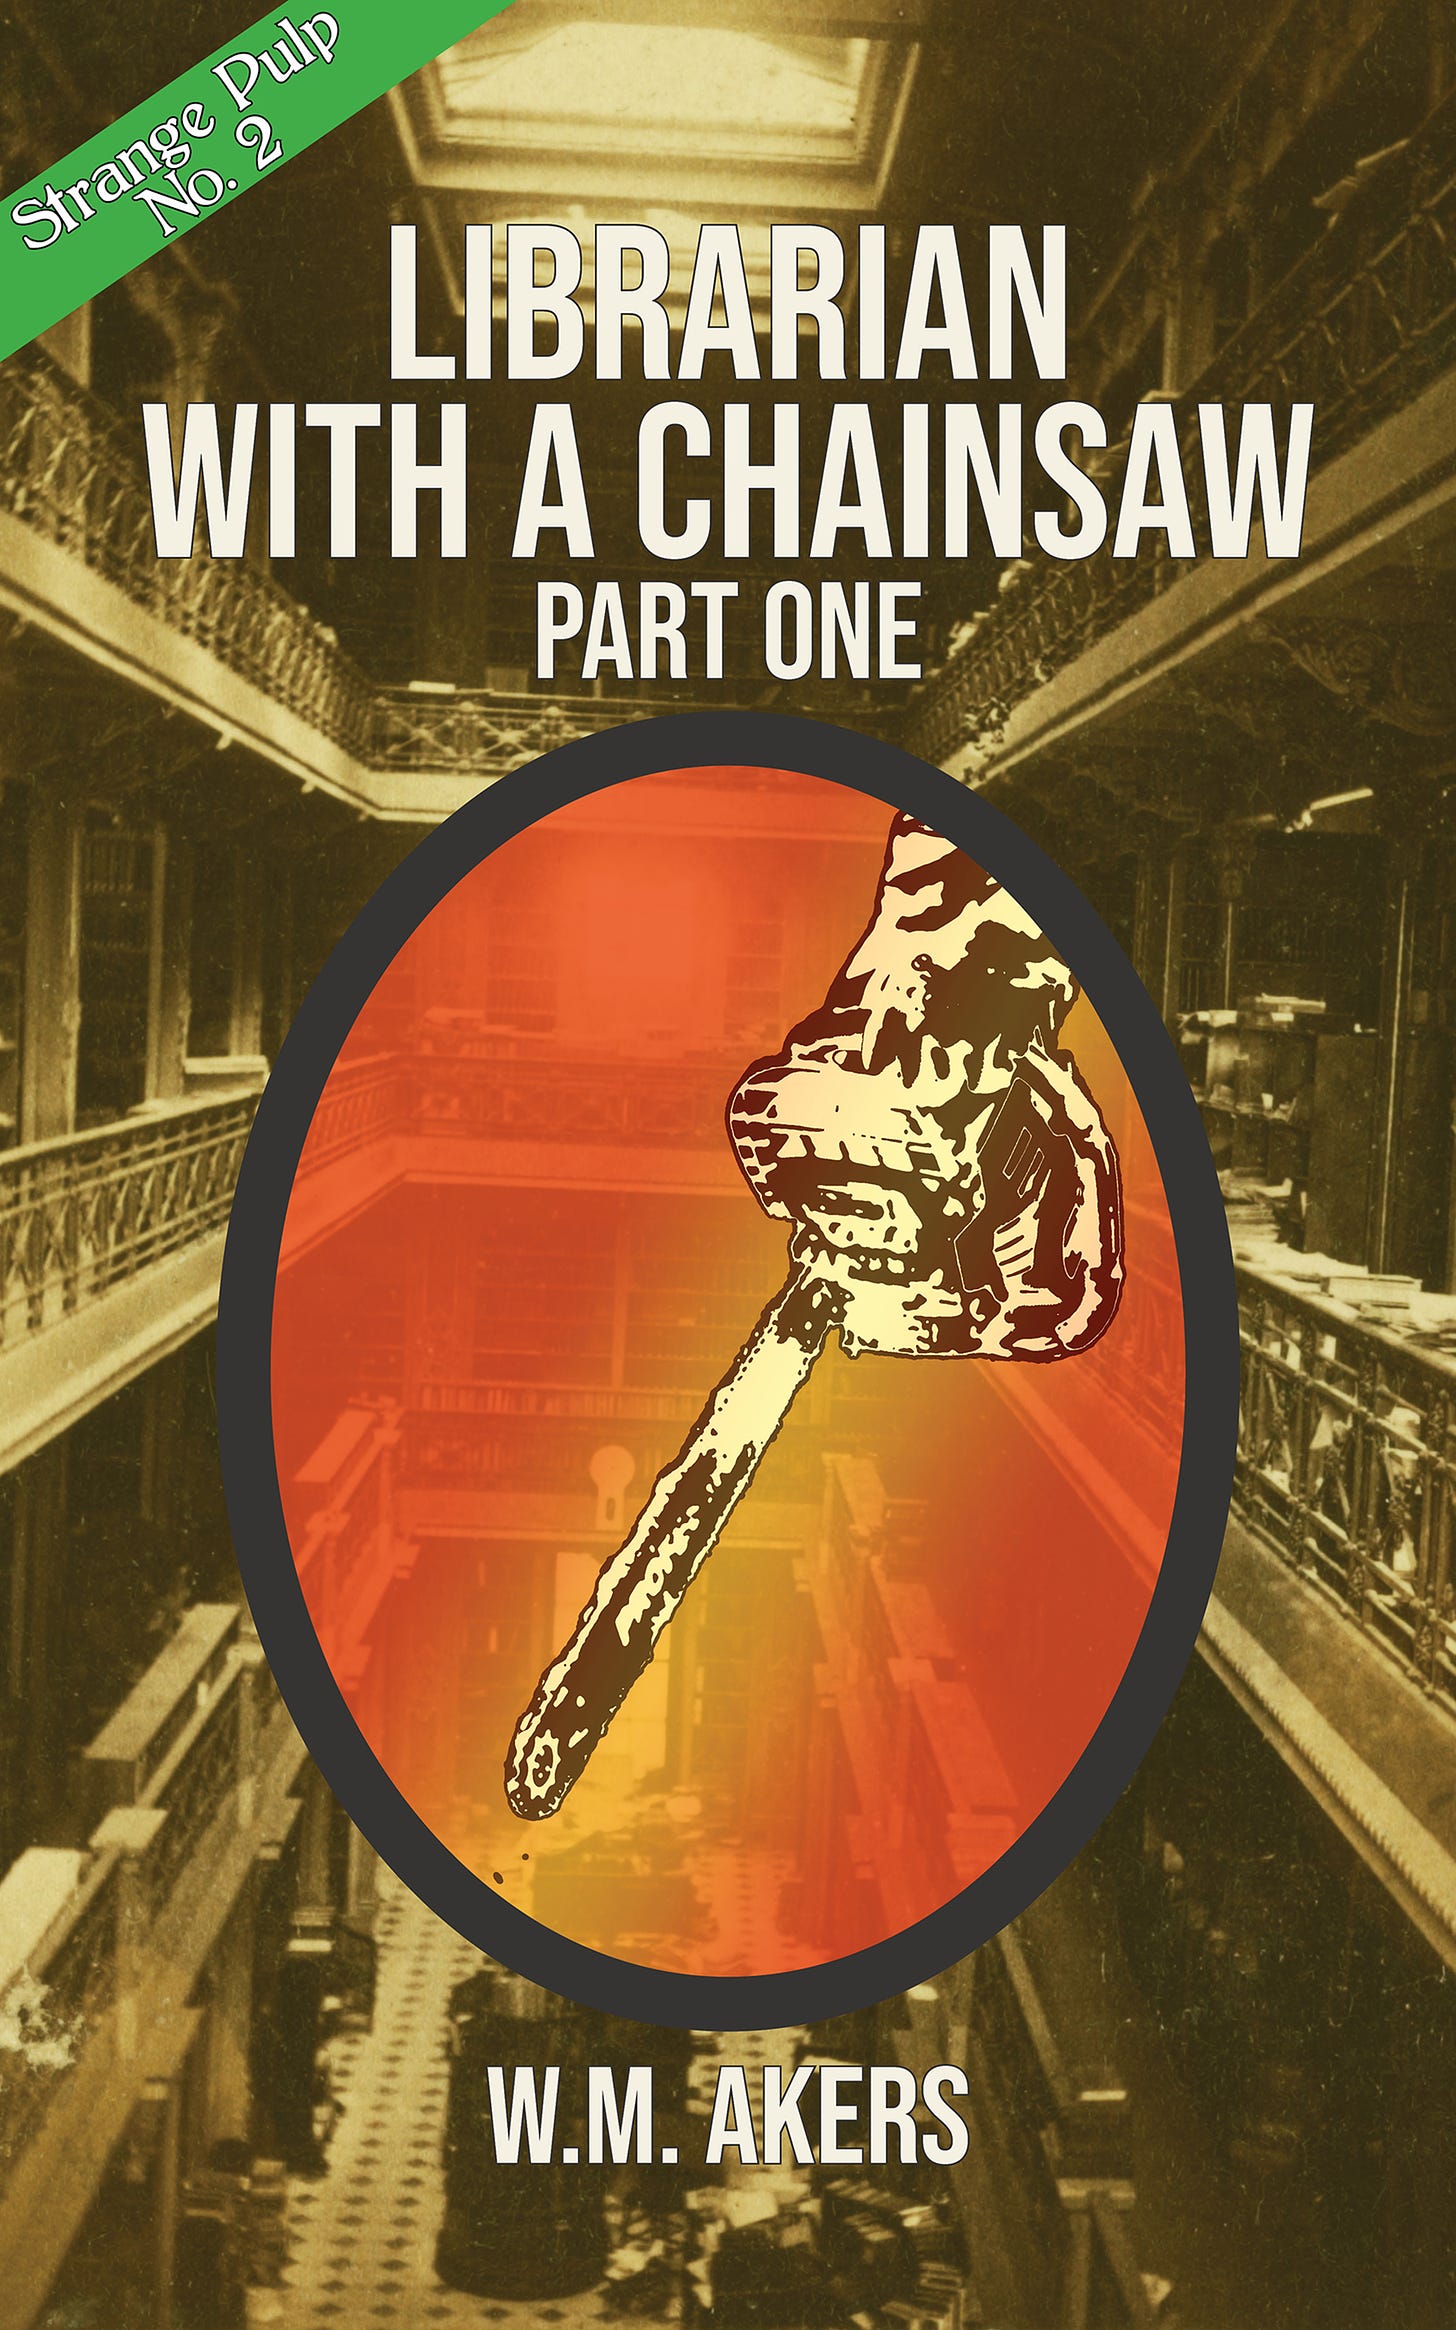 Cover image for Librarian With a Chainsaw: Part One. Shows a stylized image of a chainsaw in front of a sepia-toned photo of a grand, old fashioned library.